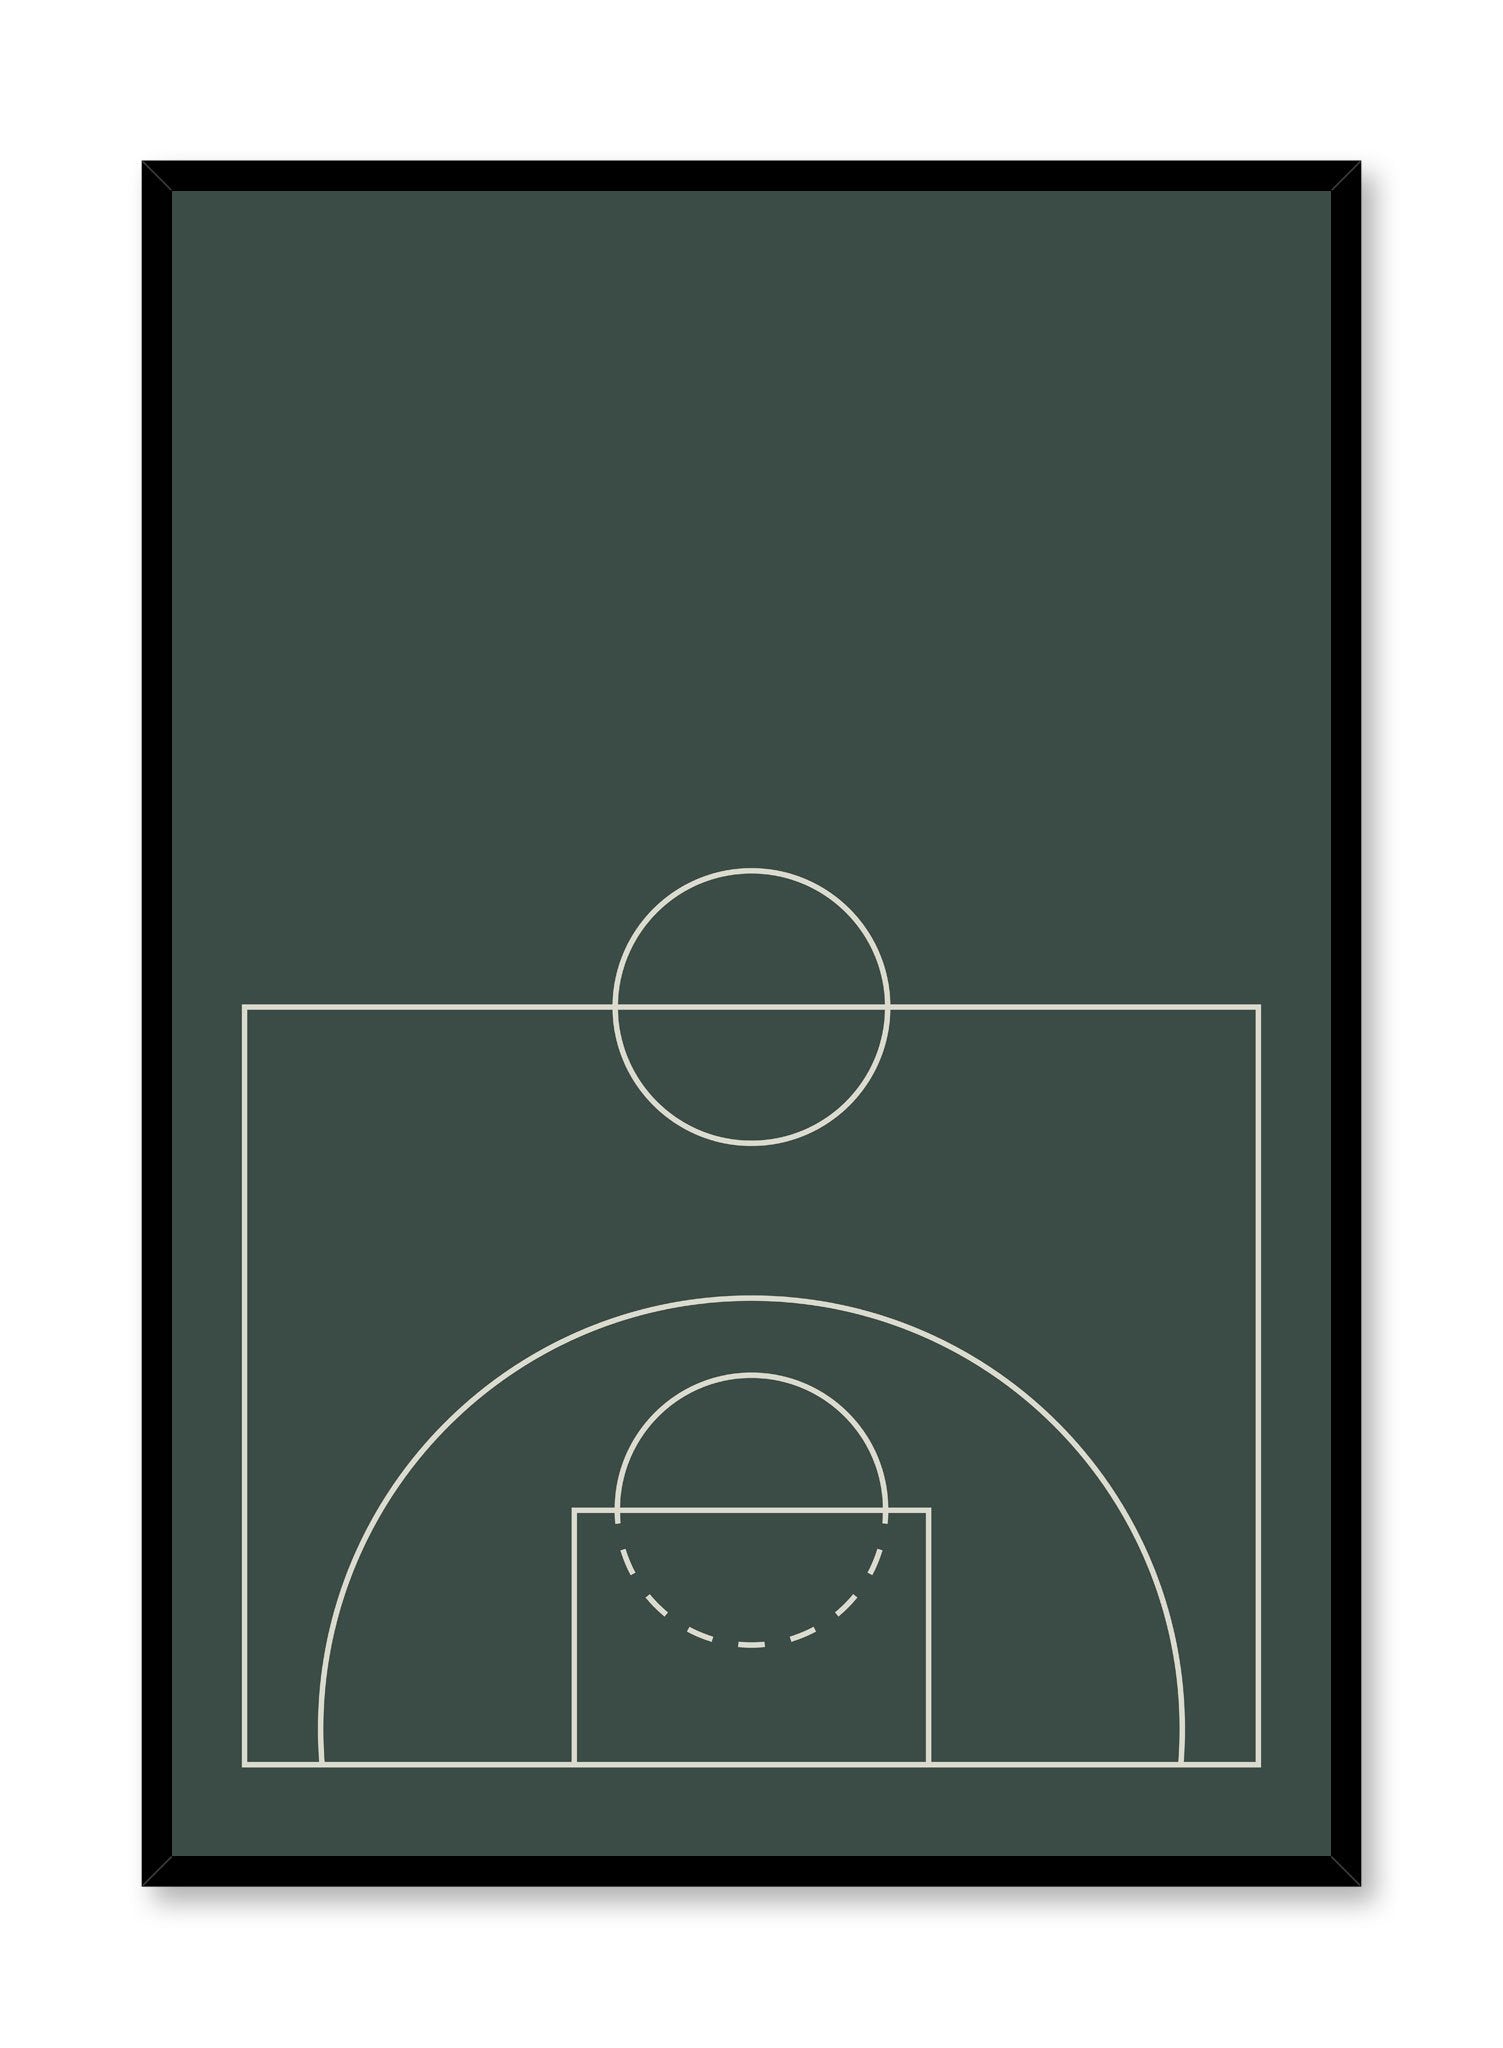 Minimalist design poster by Opposite Wall with Free-Throw abstract graphic design of basketball court in green